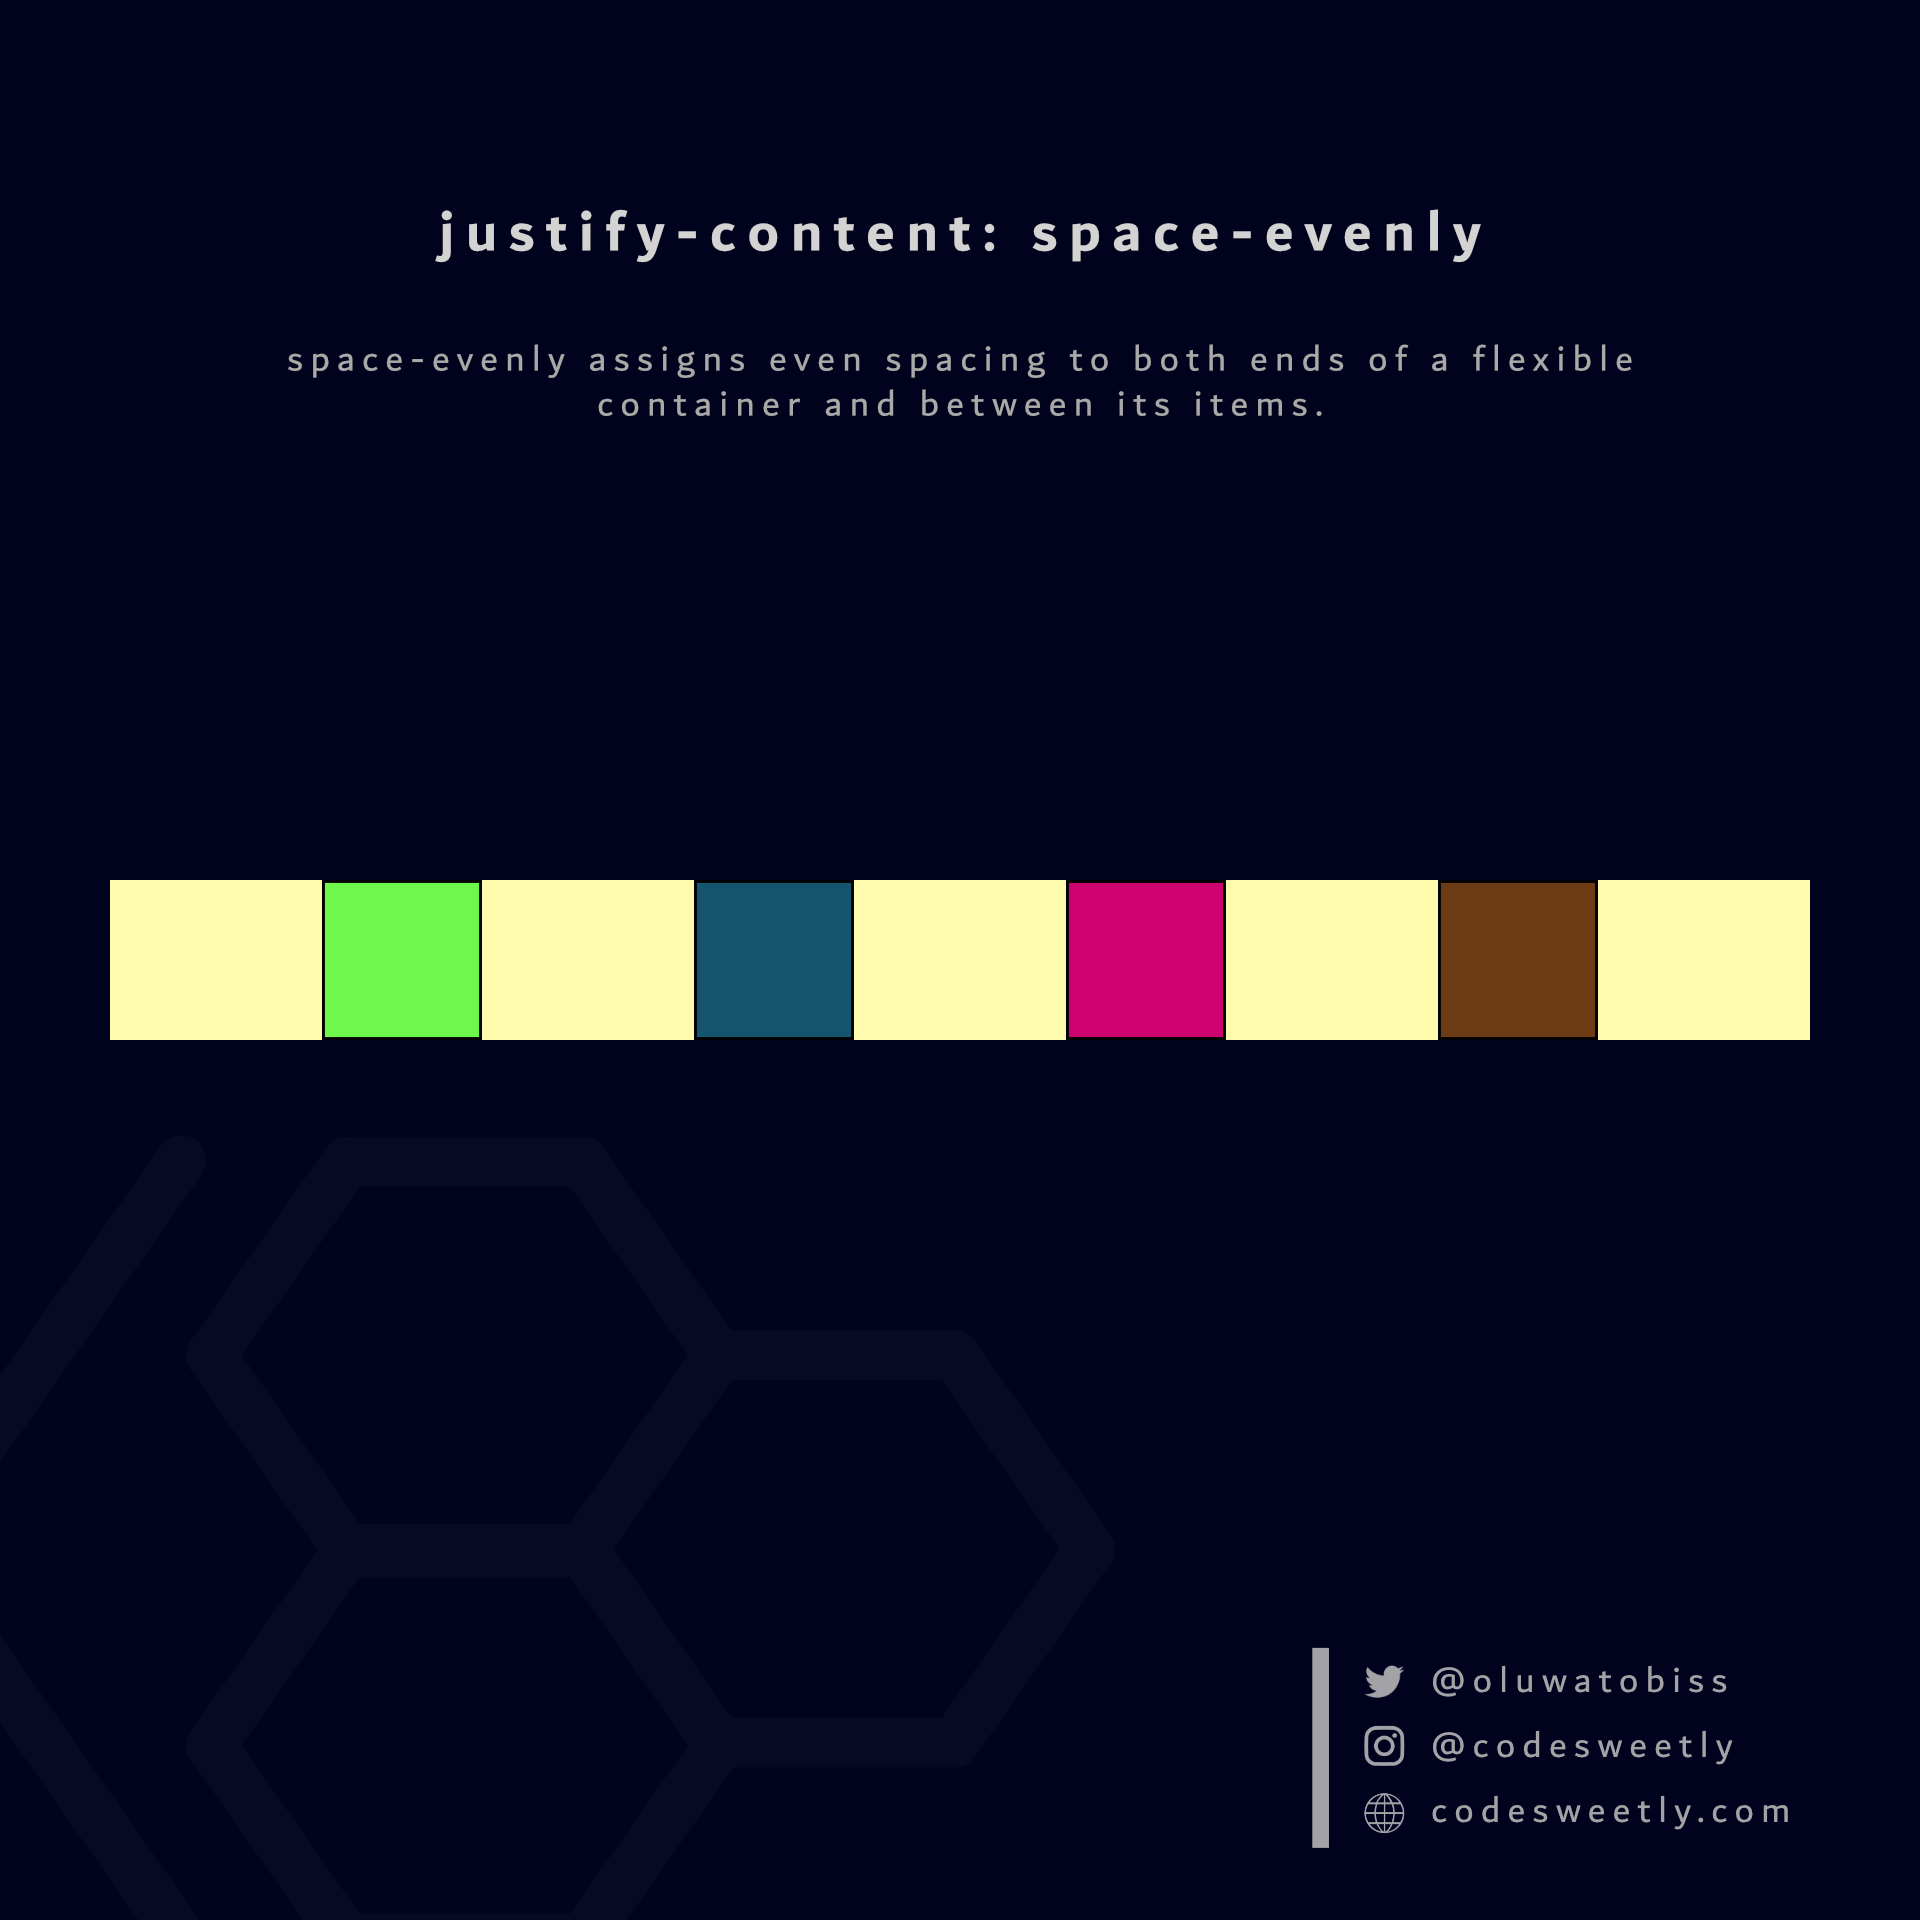 Illustration of justify-content's space-evenly value